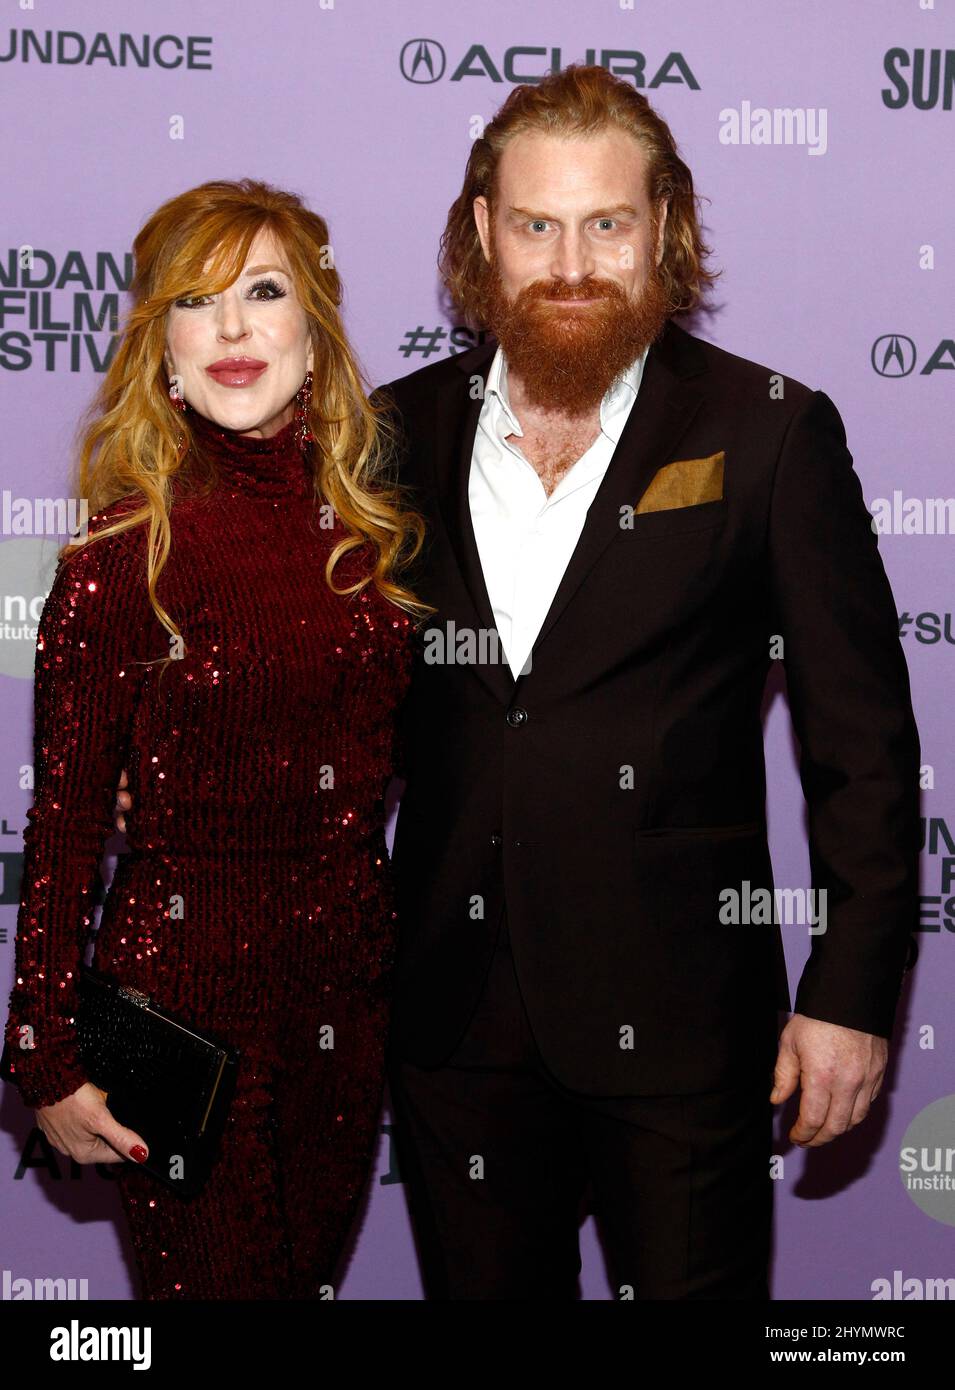 Gry Molv¦r Hivju, Kristofer Hivju at the premiere of 'Downhill' during the 2020 Sundance Film Festival held at the Eccles Theatre on January 26, 2020 in Park City, UT. Stock Photo